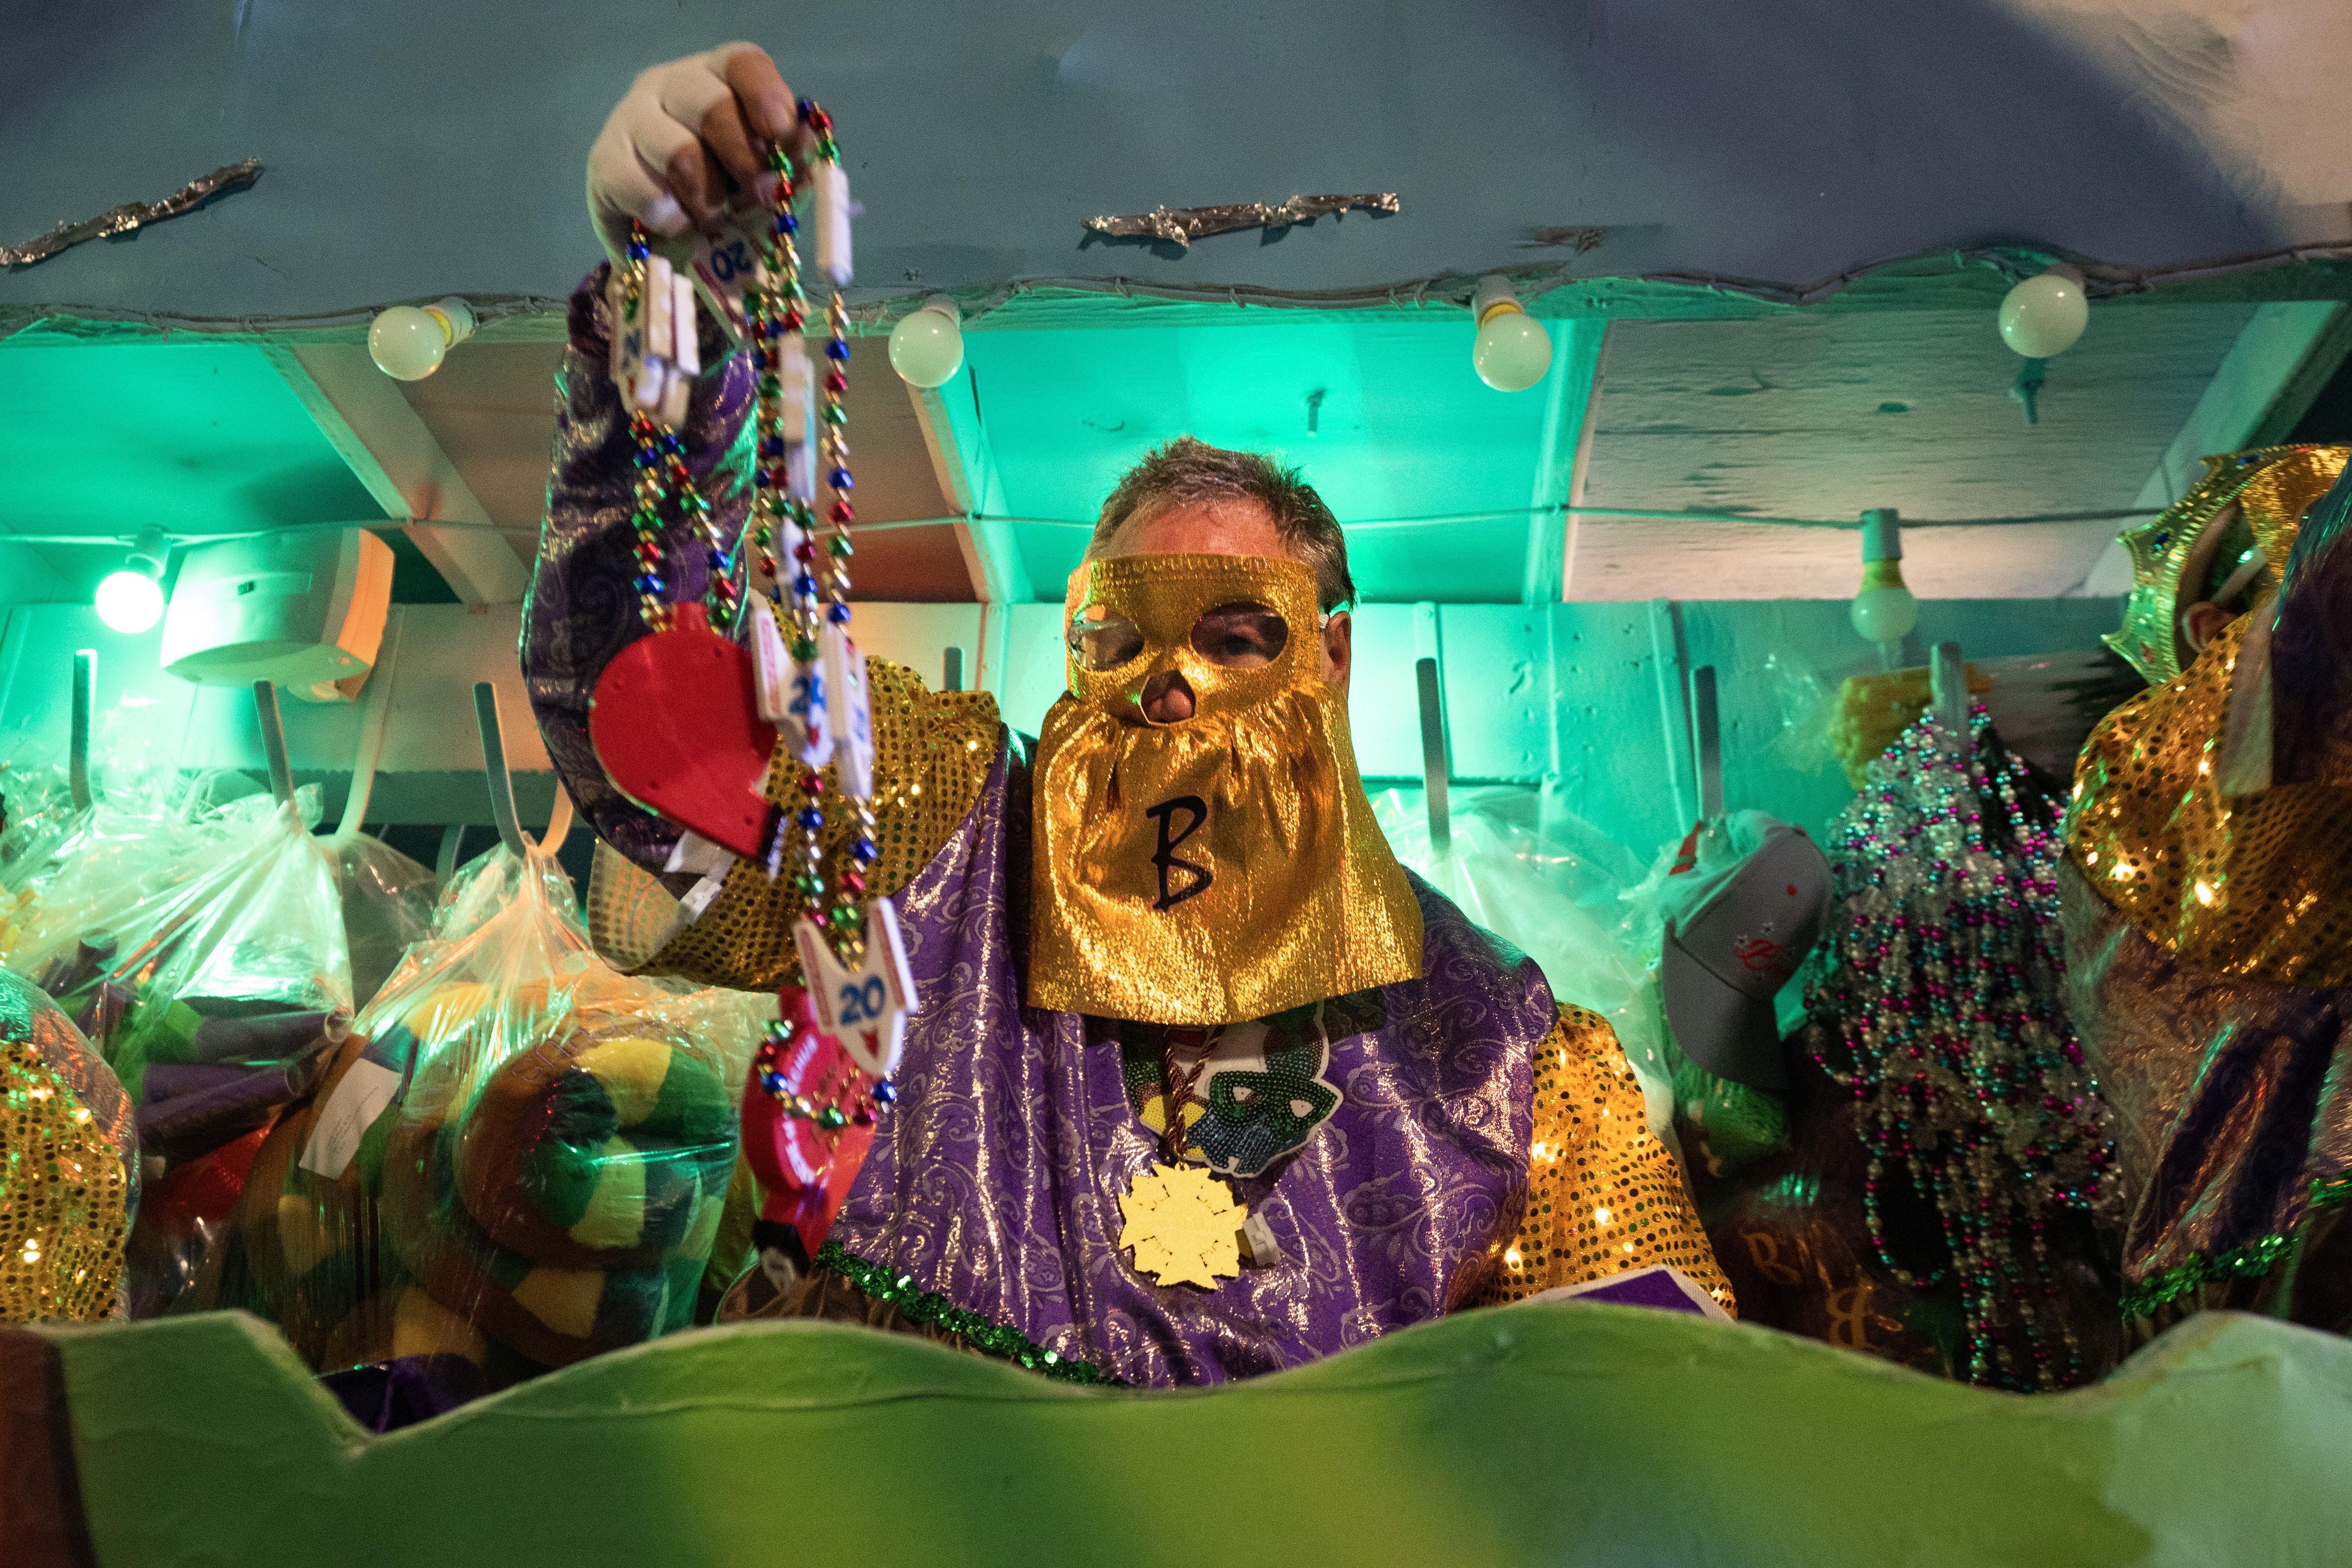 A masked Bacchus krewe-member hands beads toward the camera.